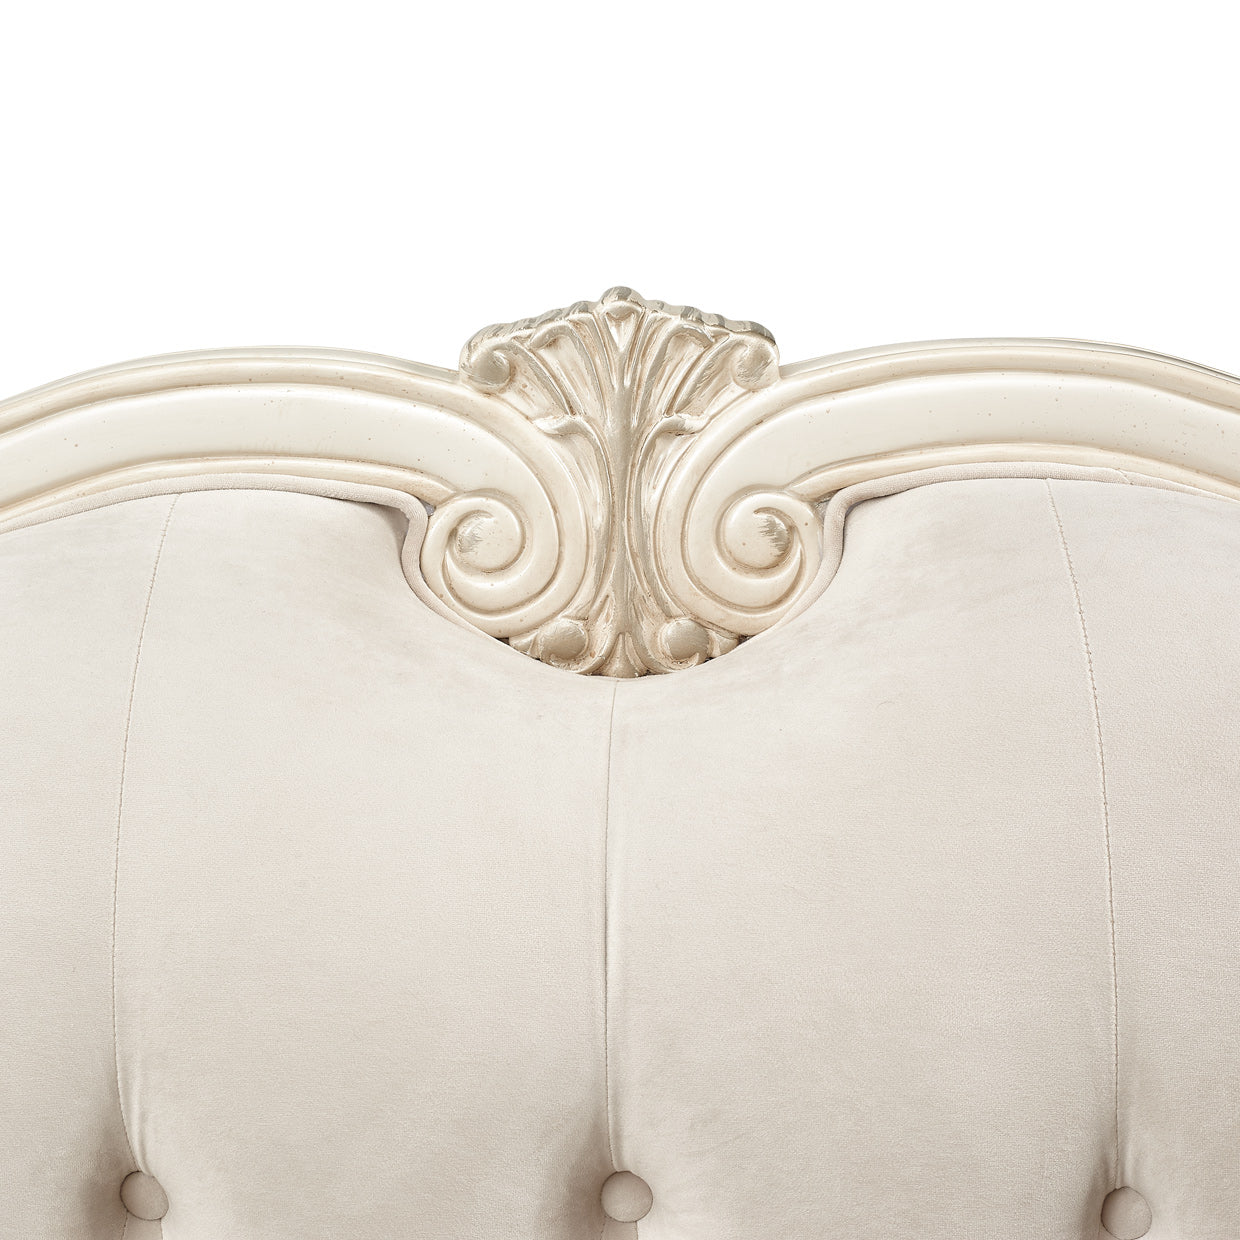 LAVELLE-CLASSIC PEARL Lavelle Sofa Ivory Classic Pearl - Dream art Gallery